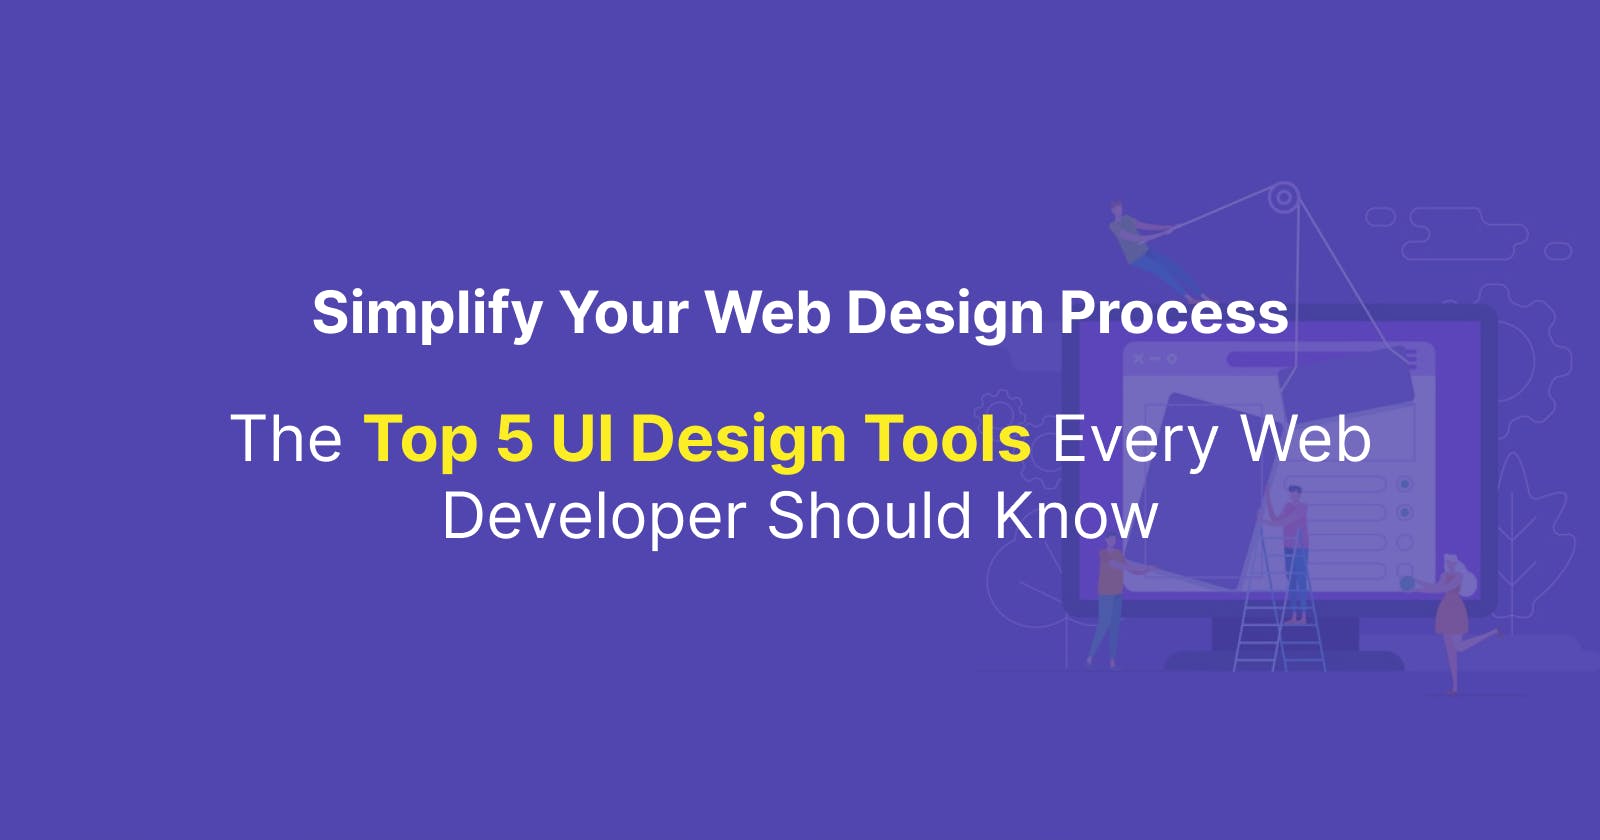 Simplify Your Web Design Process: The Top 5 UI Design Tools Every Web Developer Should Know